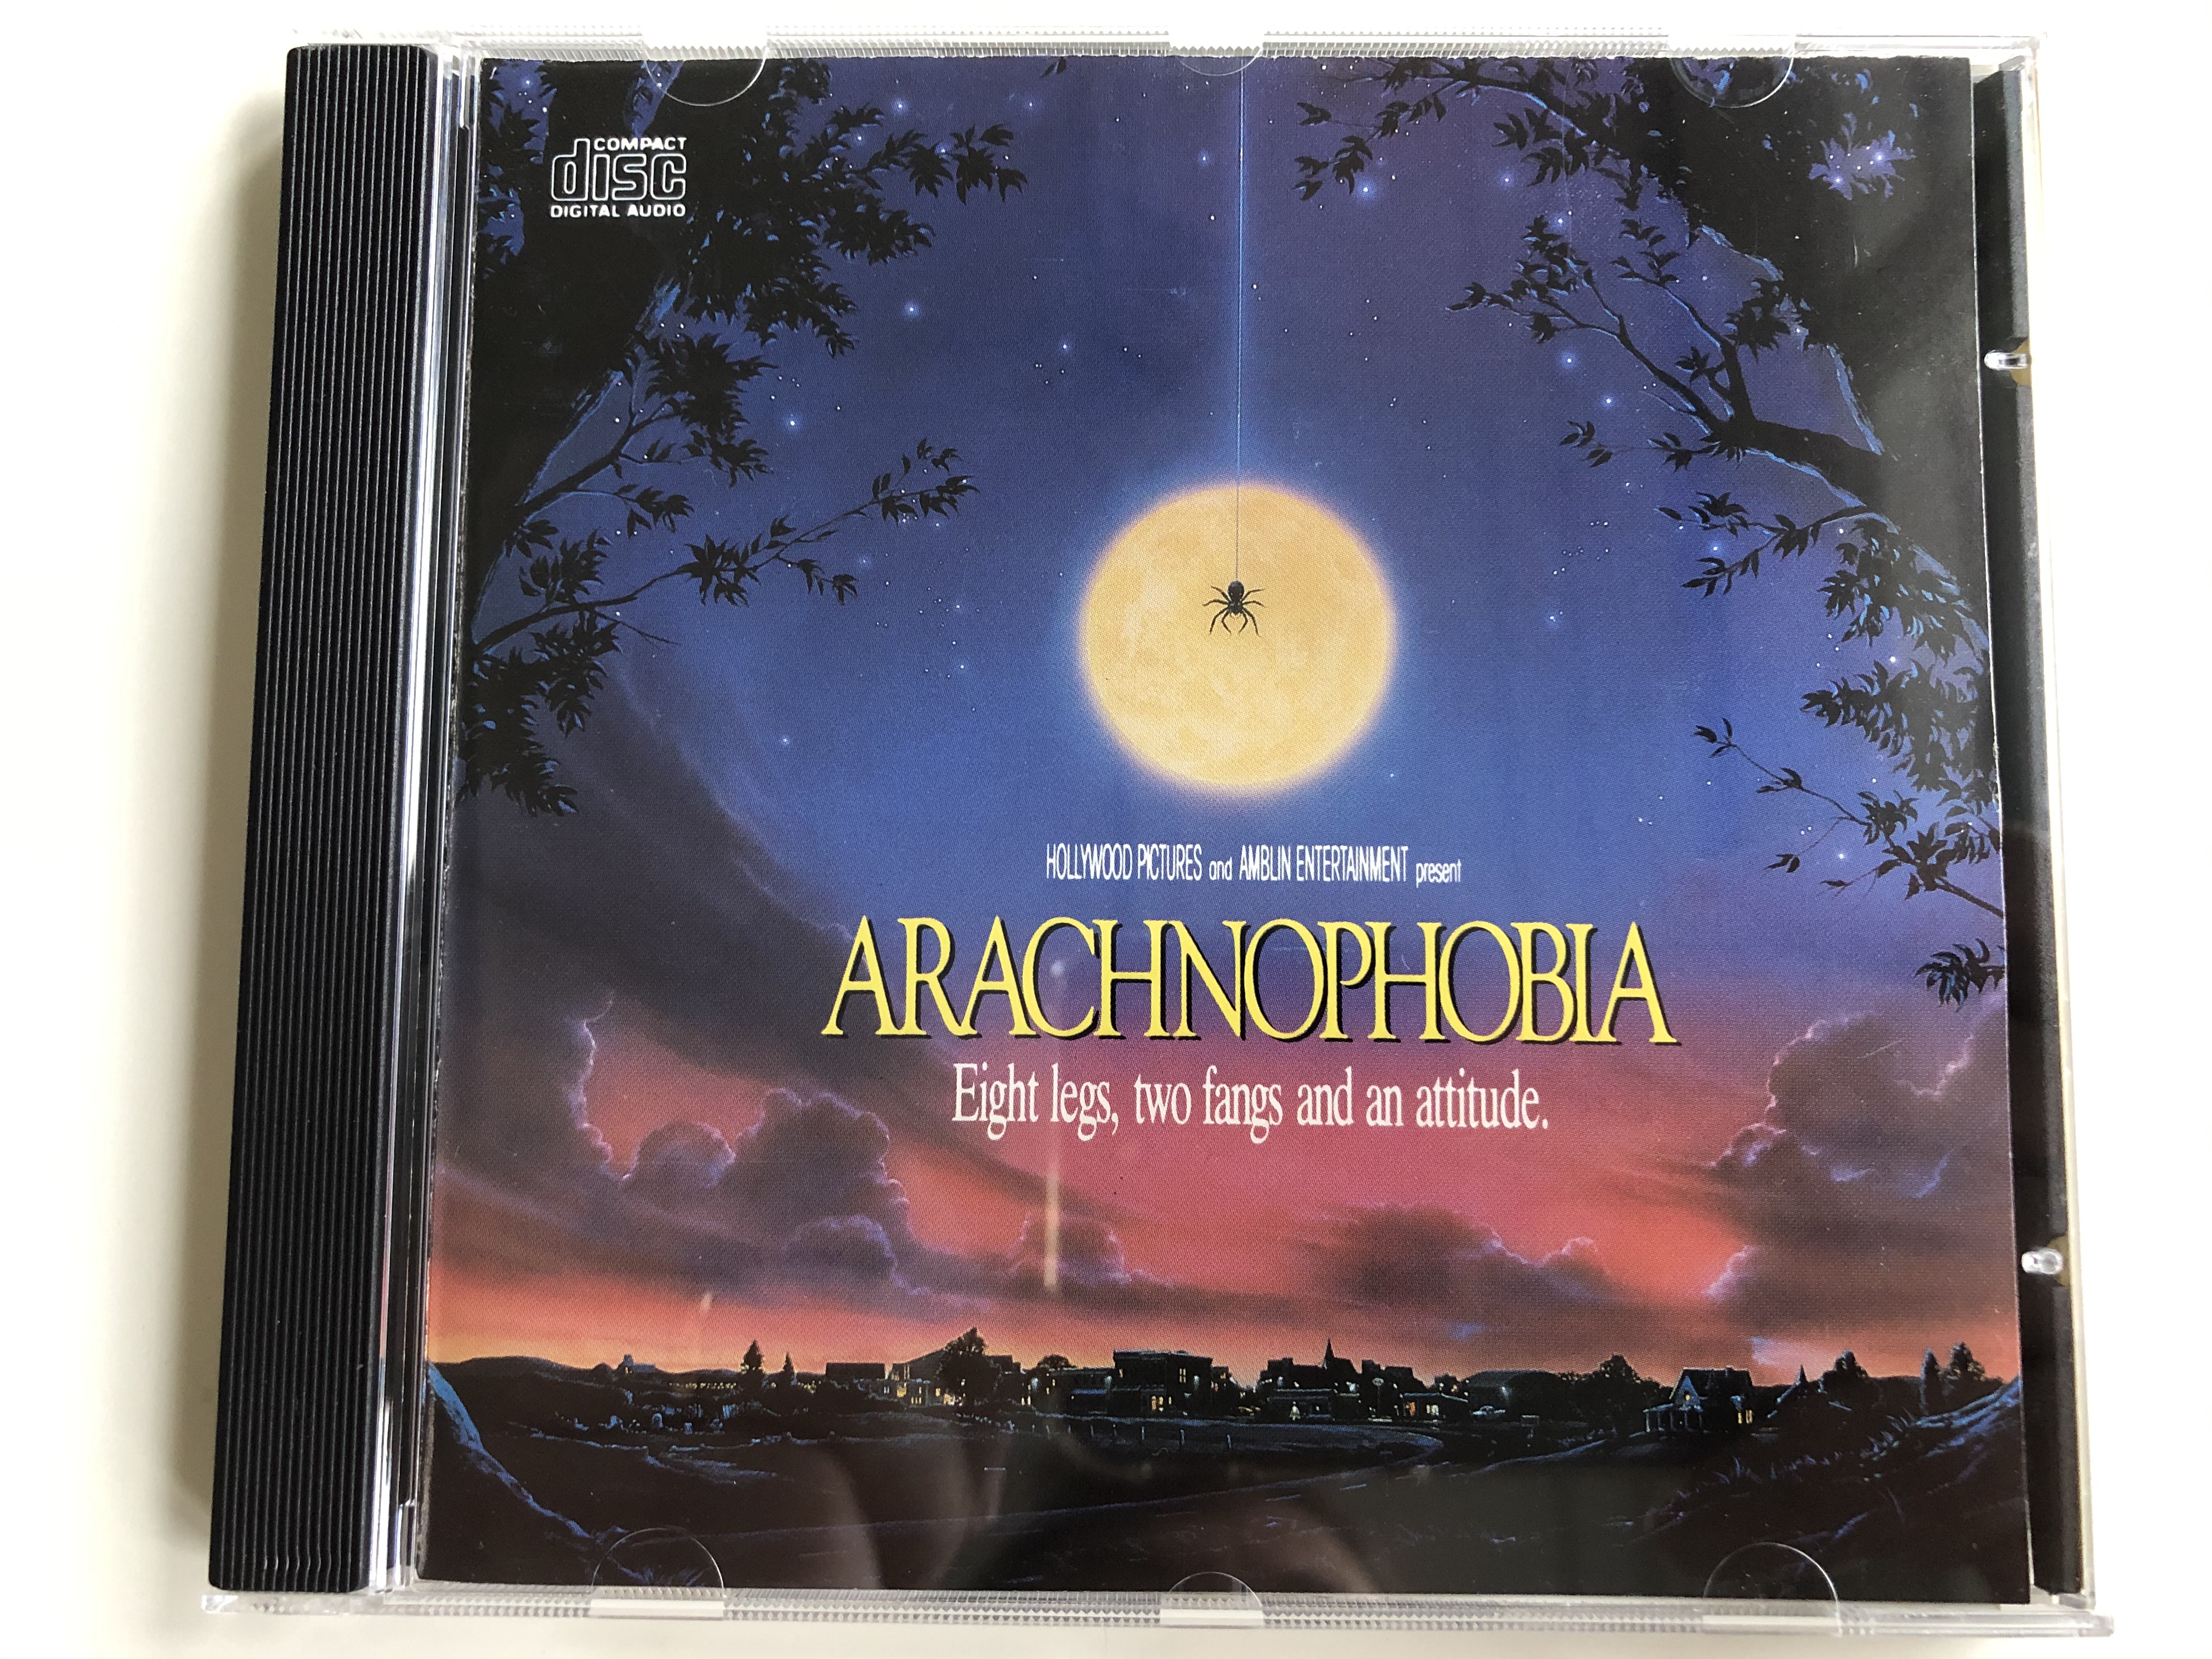 hollywood-pictures-and-amblin-entertainment-presents-arachnophobia-eight-legs-two-fangs-and-an-attitude-hollywood-records-audio-cd-1990-60974-2-1-.jpg